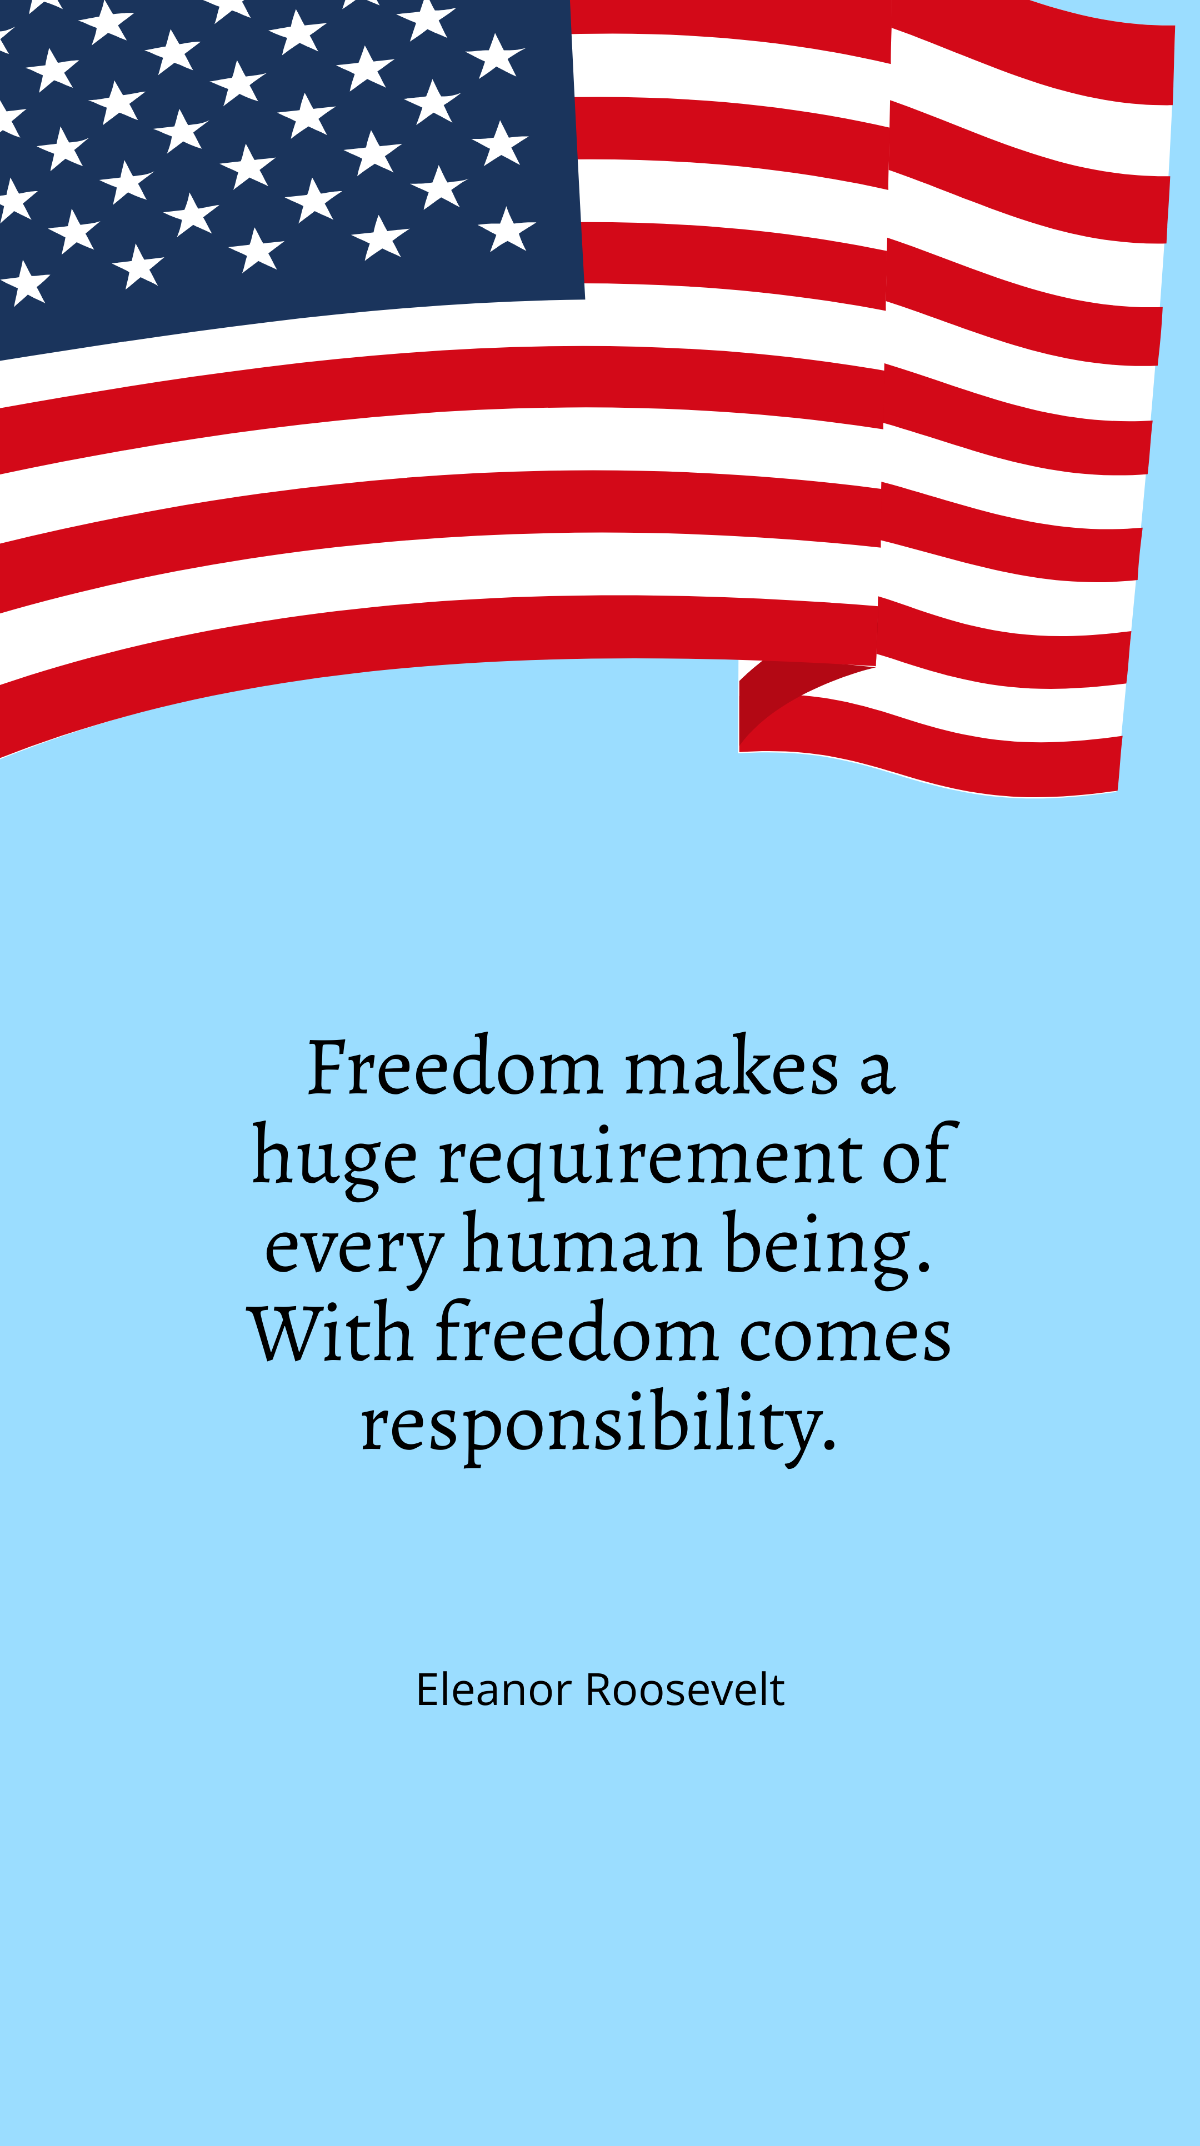 Eleanor Roosevelt - Freedom makes a huge requirement of every human being. With freedom comes responsibility.